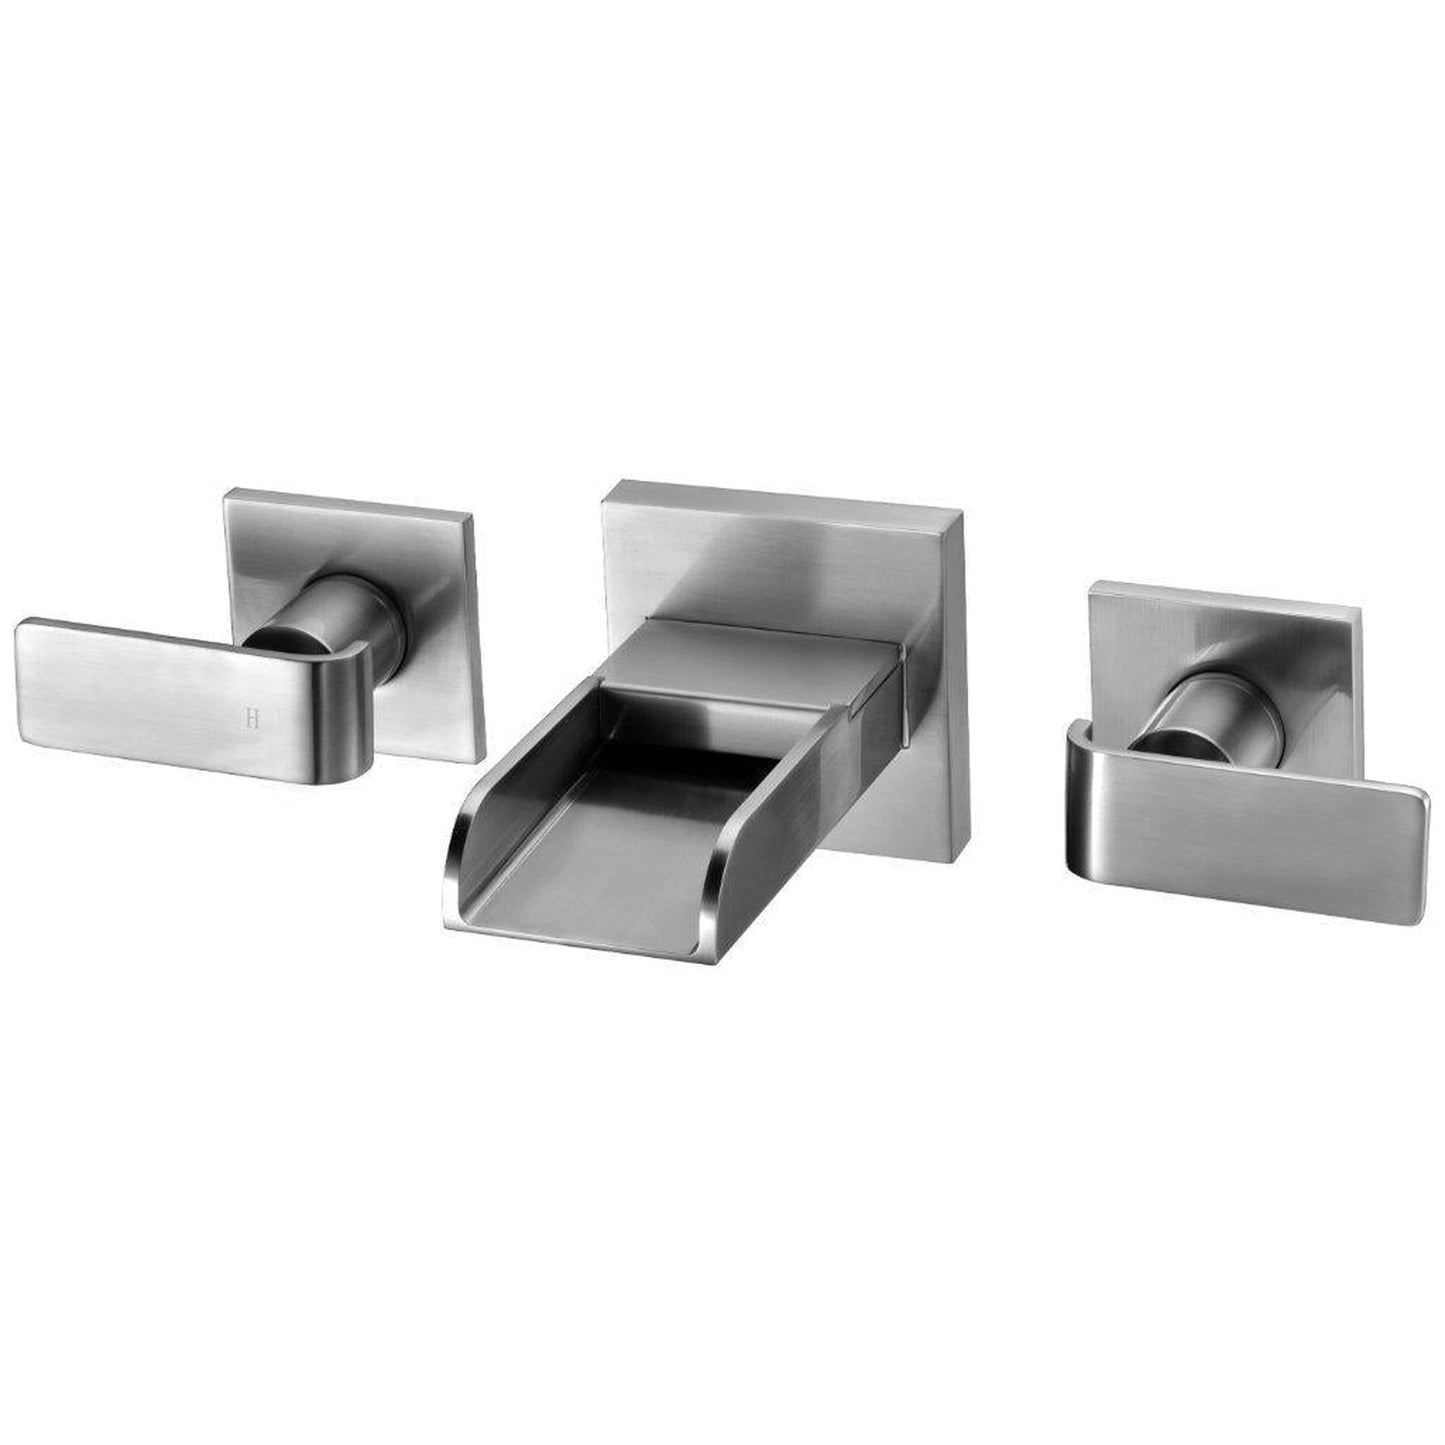 ALFI Brand AB1796-BN Brushed Nickel Wall-Mounted Widespread Waterfall Spout Brass Bathroom Sink Faucet With Two Lever Handles